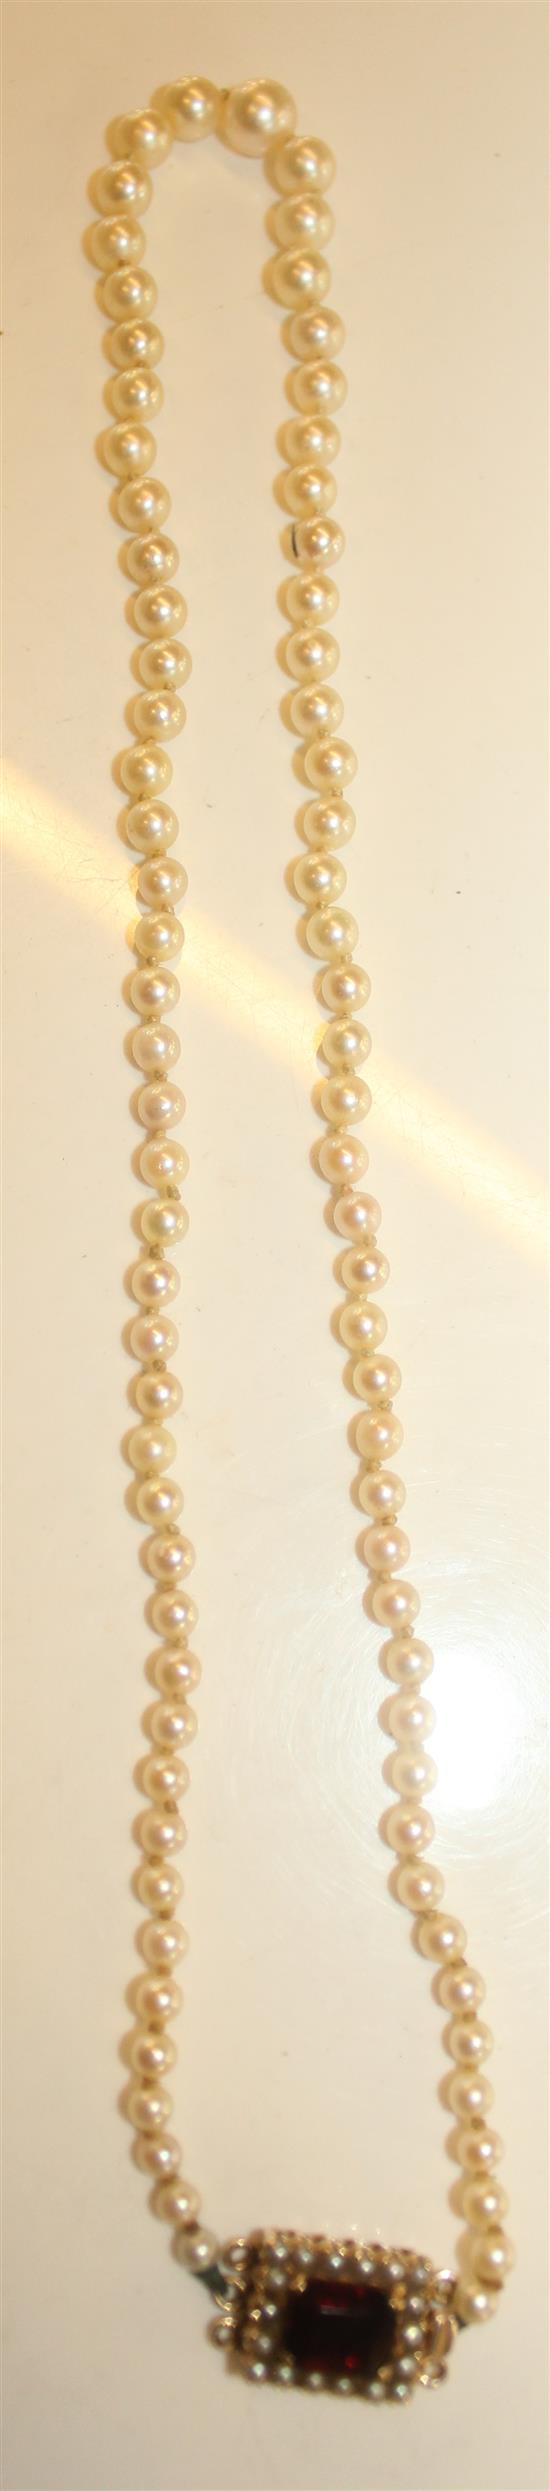 Double row of cultured pearls with turquoise and pearl clasp